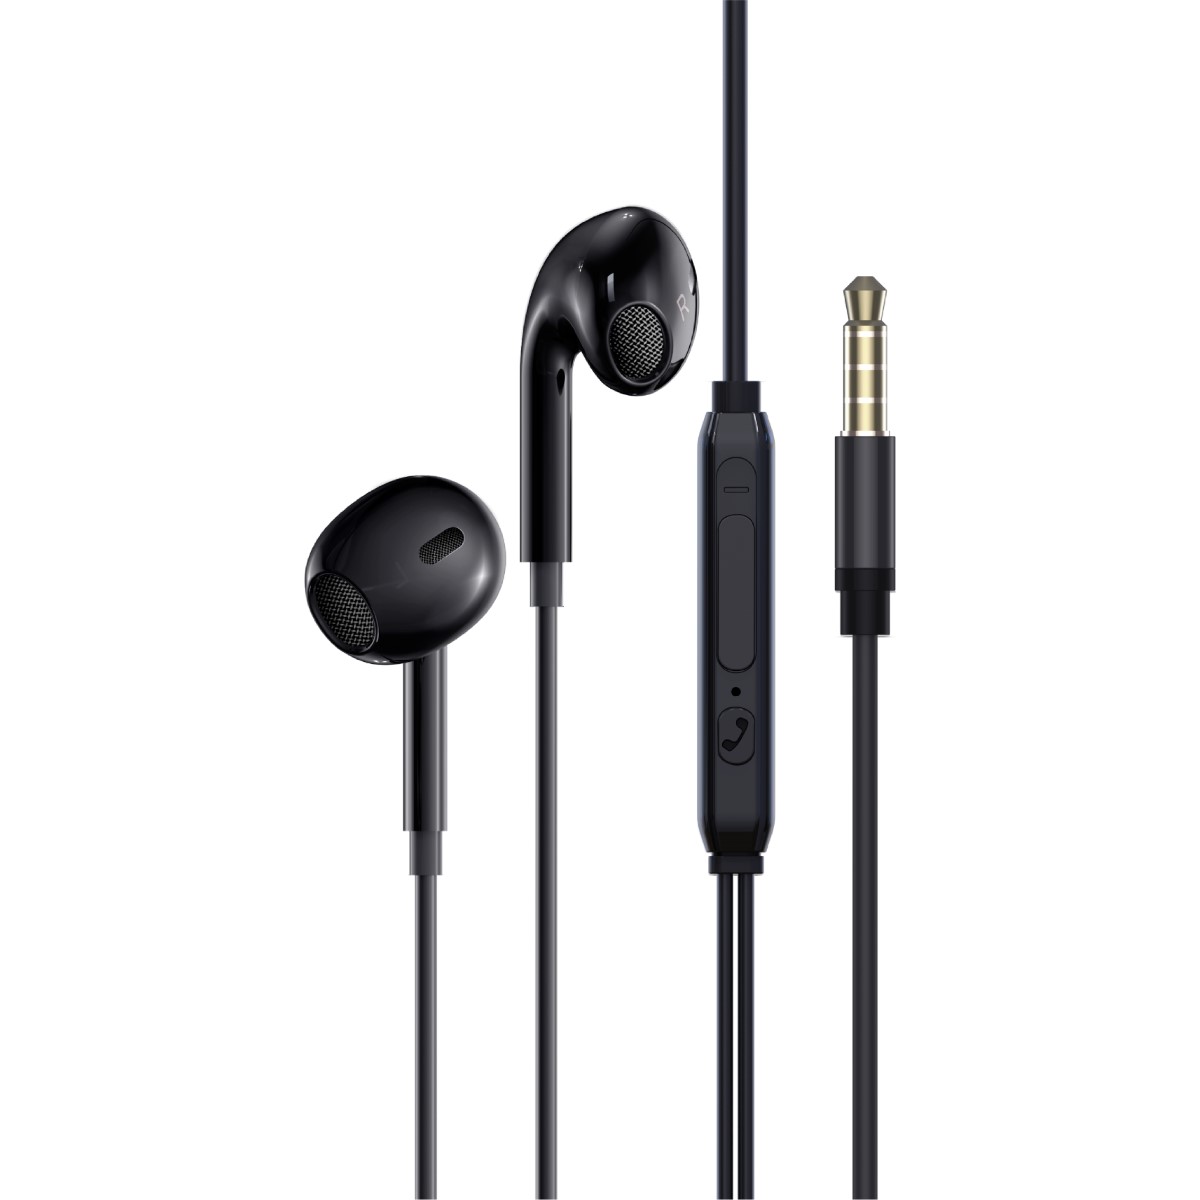 Promate Wired Earphones with Mic, Noise Isolation, Anti-Tangle Cable and Button Control, Phonic.Black